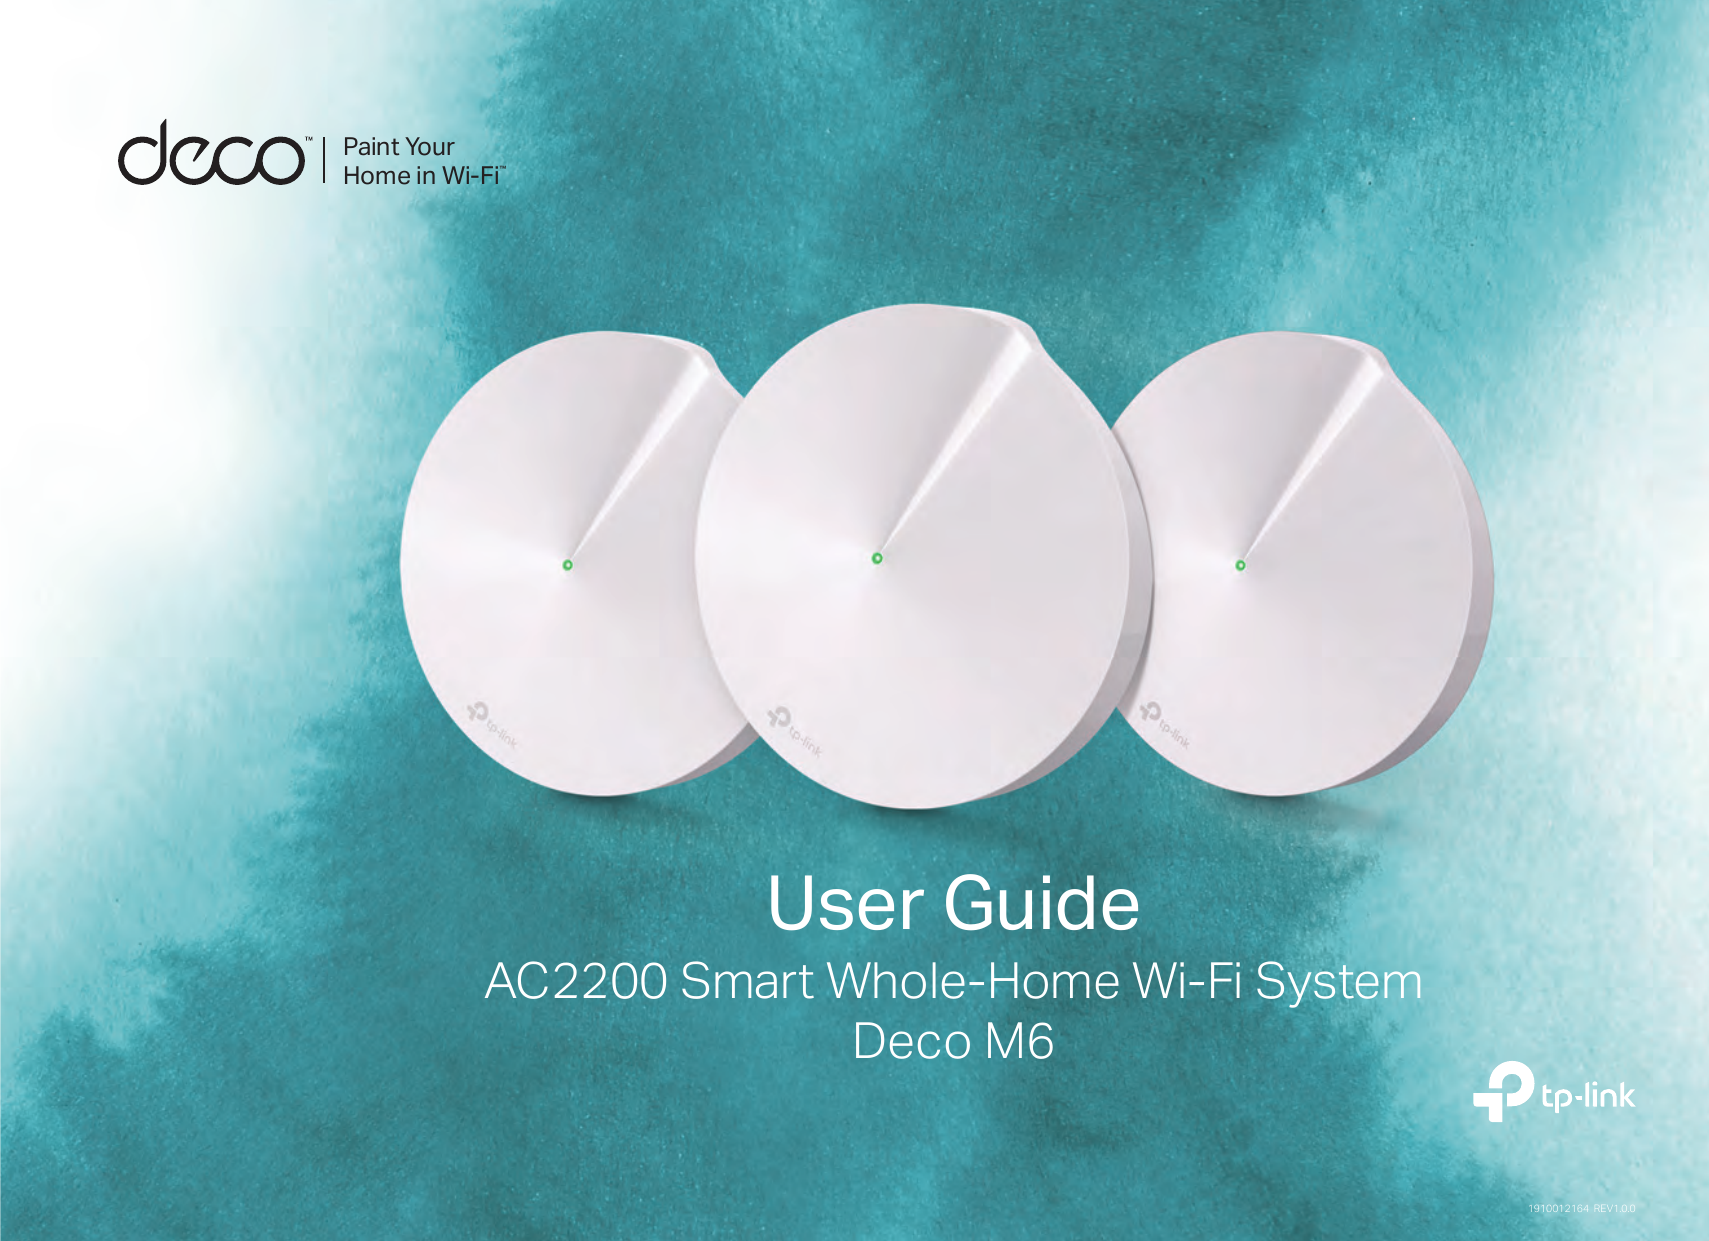 Paint Your Home in Wi-Fi™User GuideAC2200 Smart Whole-Home Wi-Fi SystemDeco M61910012164  REV1.0.0